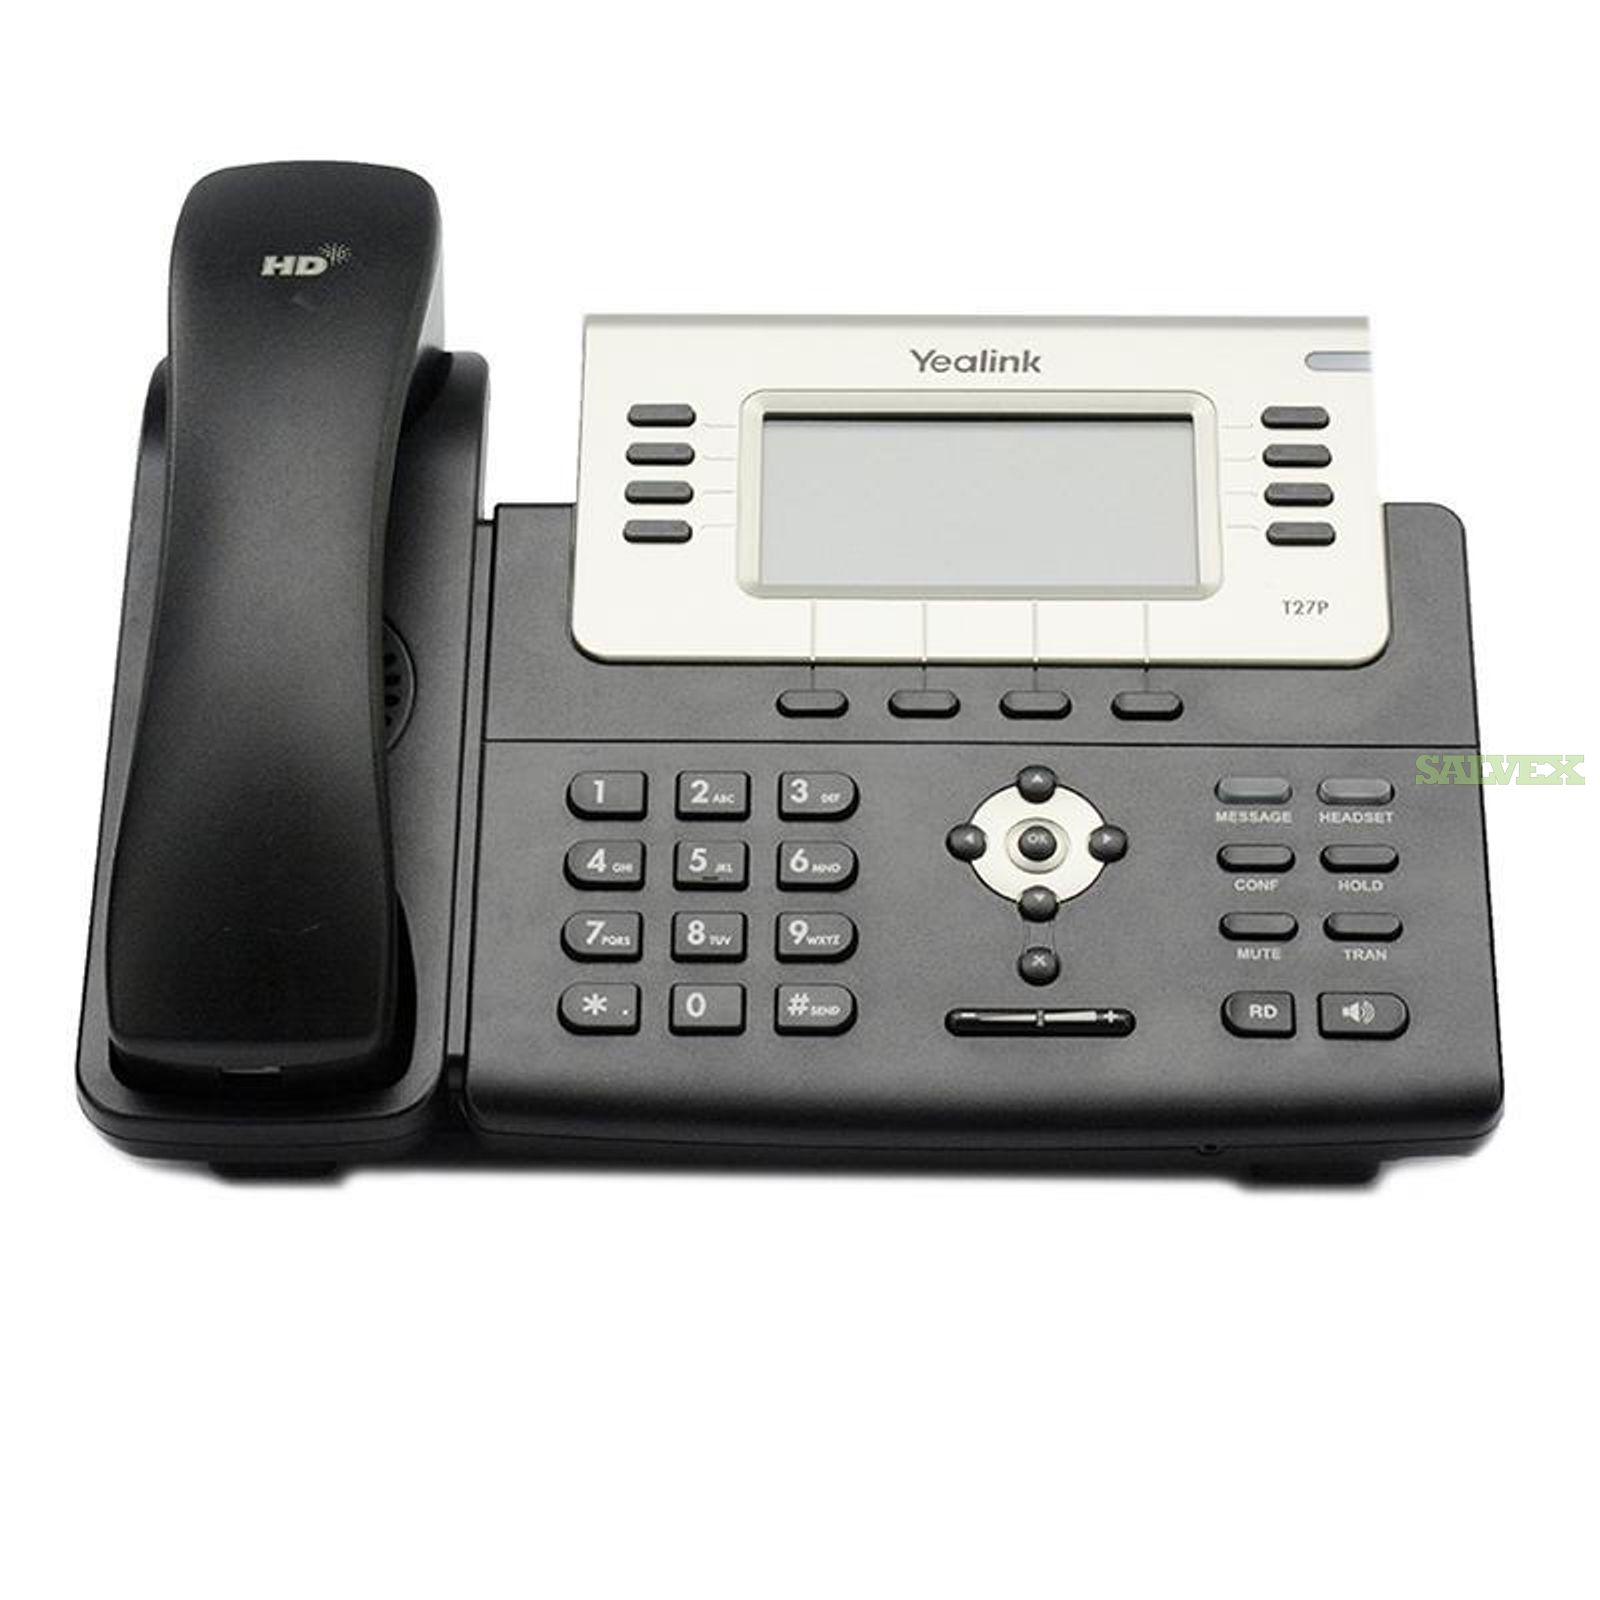 Yealink SIP-T27P VOIP POE Executive 6 Line LCD IP Phone (No Power Supply) 100 X New 